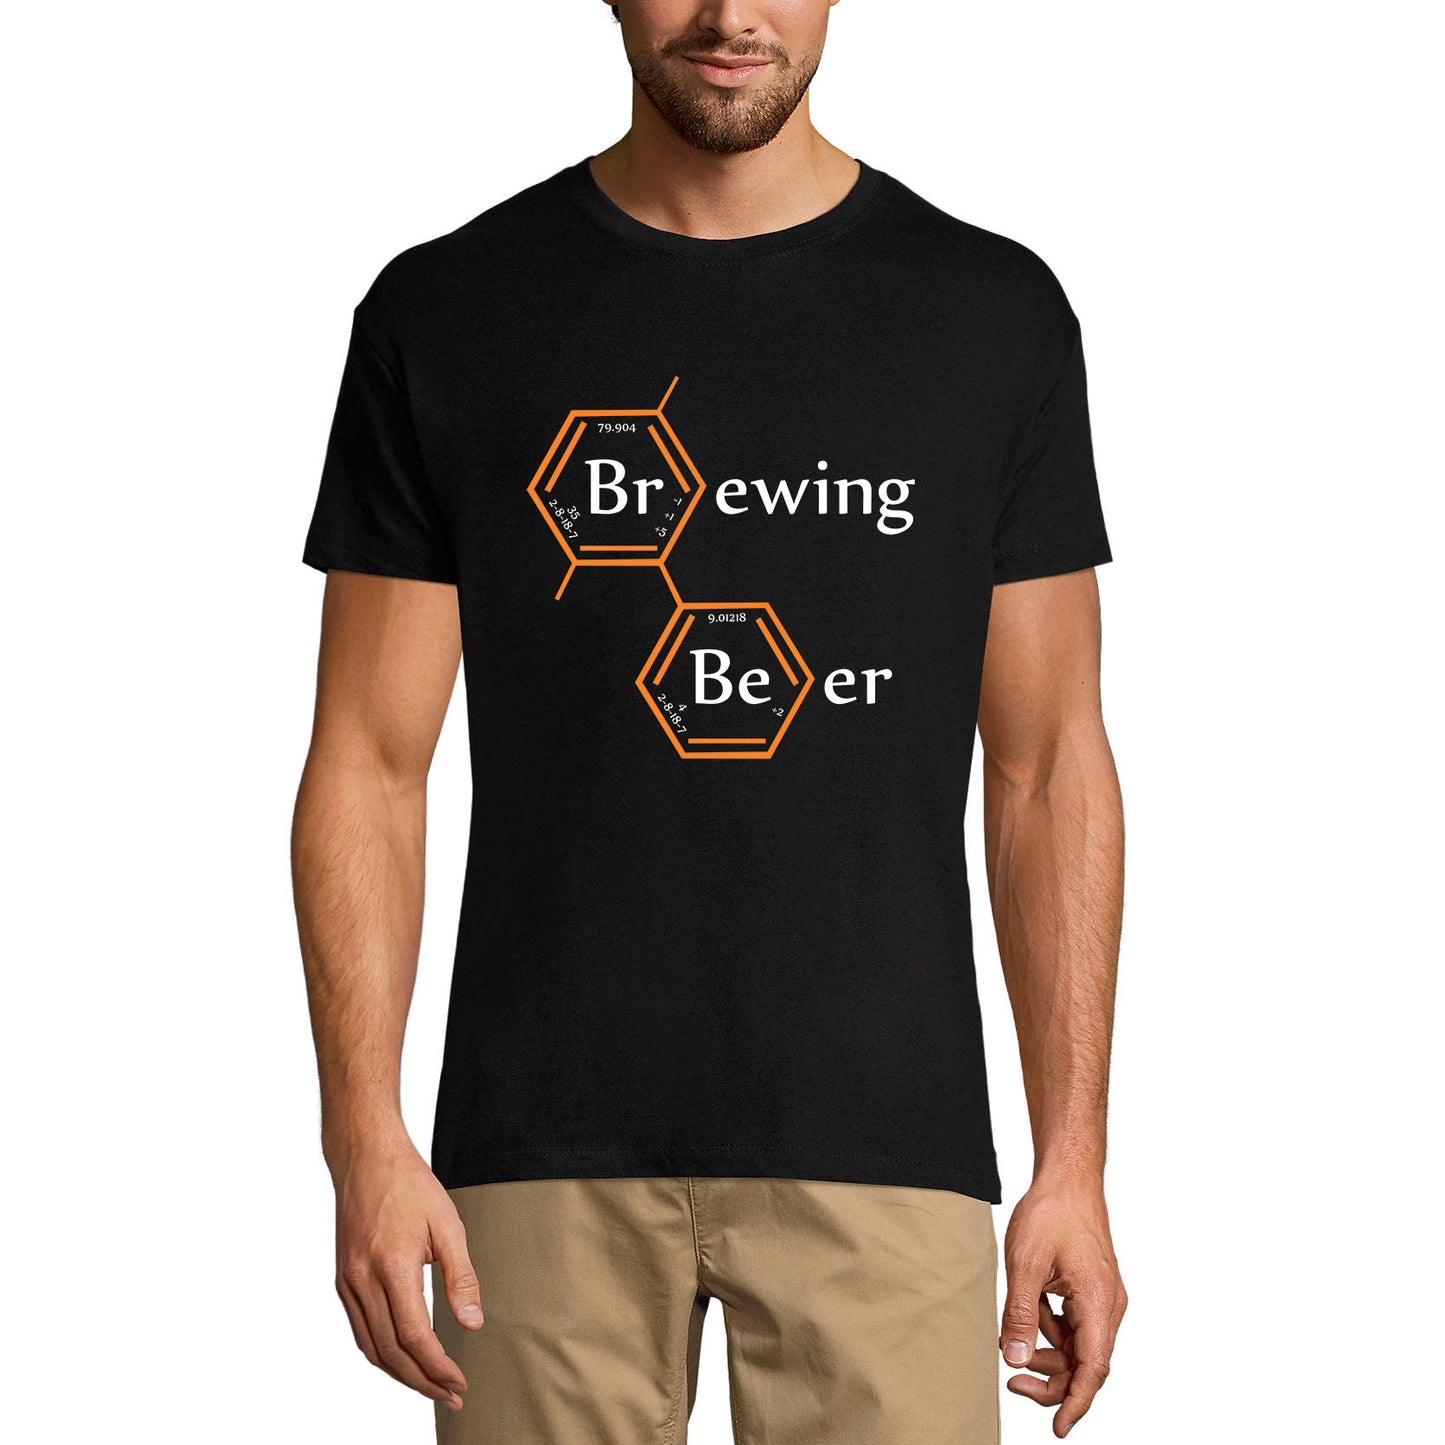 ULTRABASIC Men's T-Shirt Brewing Beer - Periodic Elements Funny Beer Lover Tee Shirt